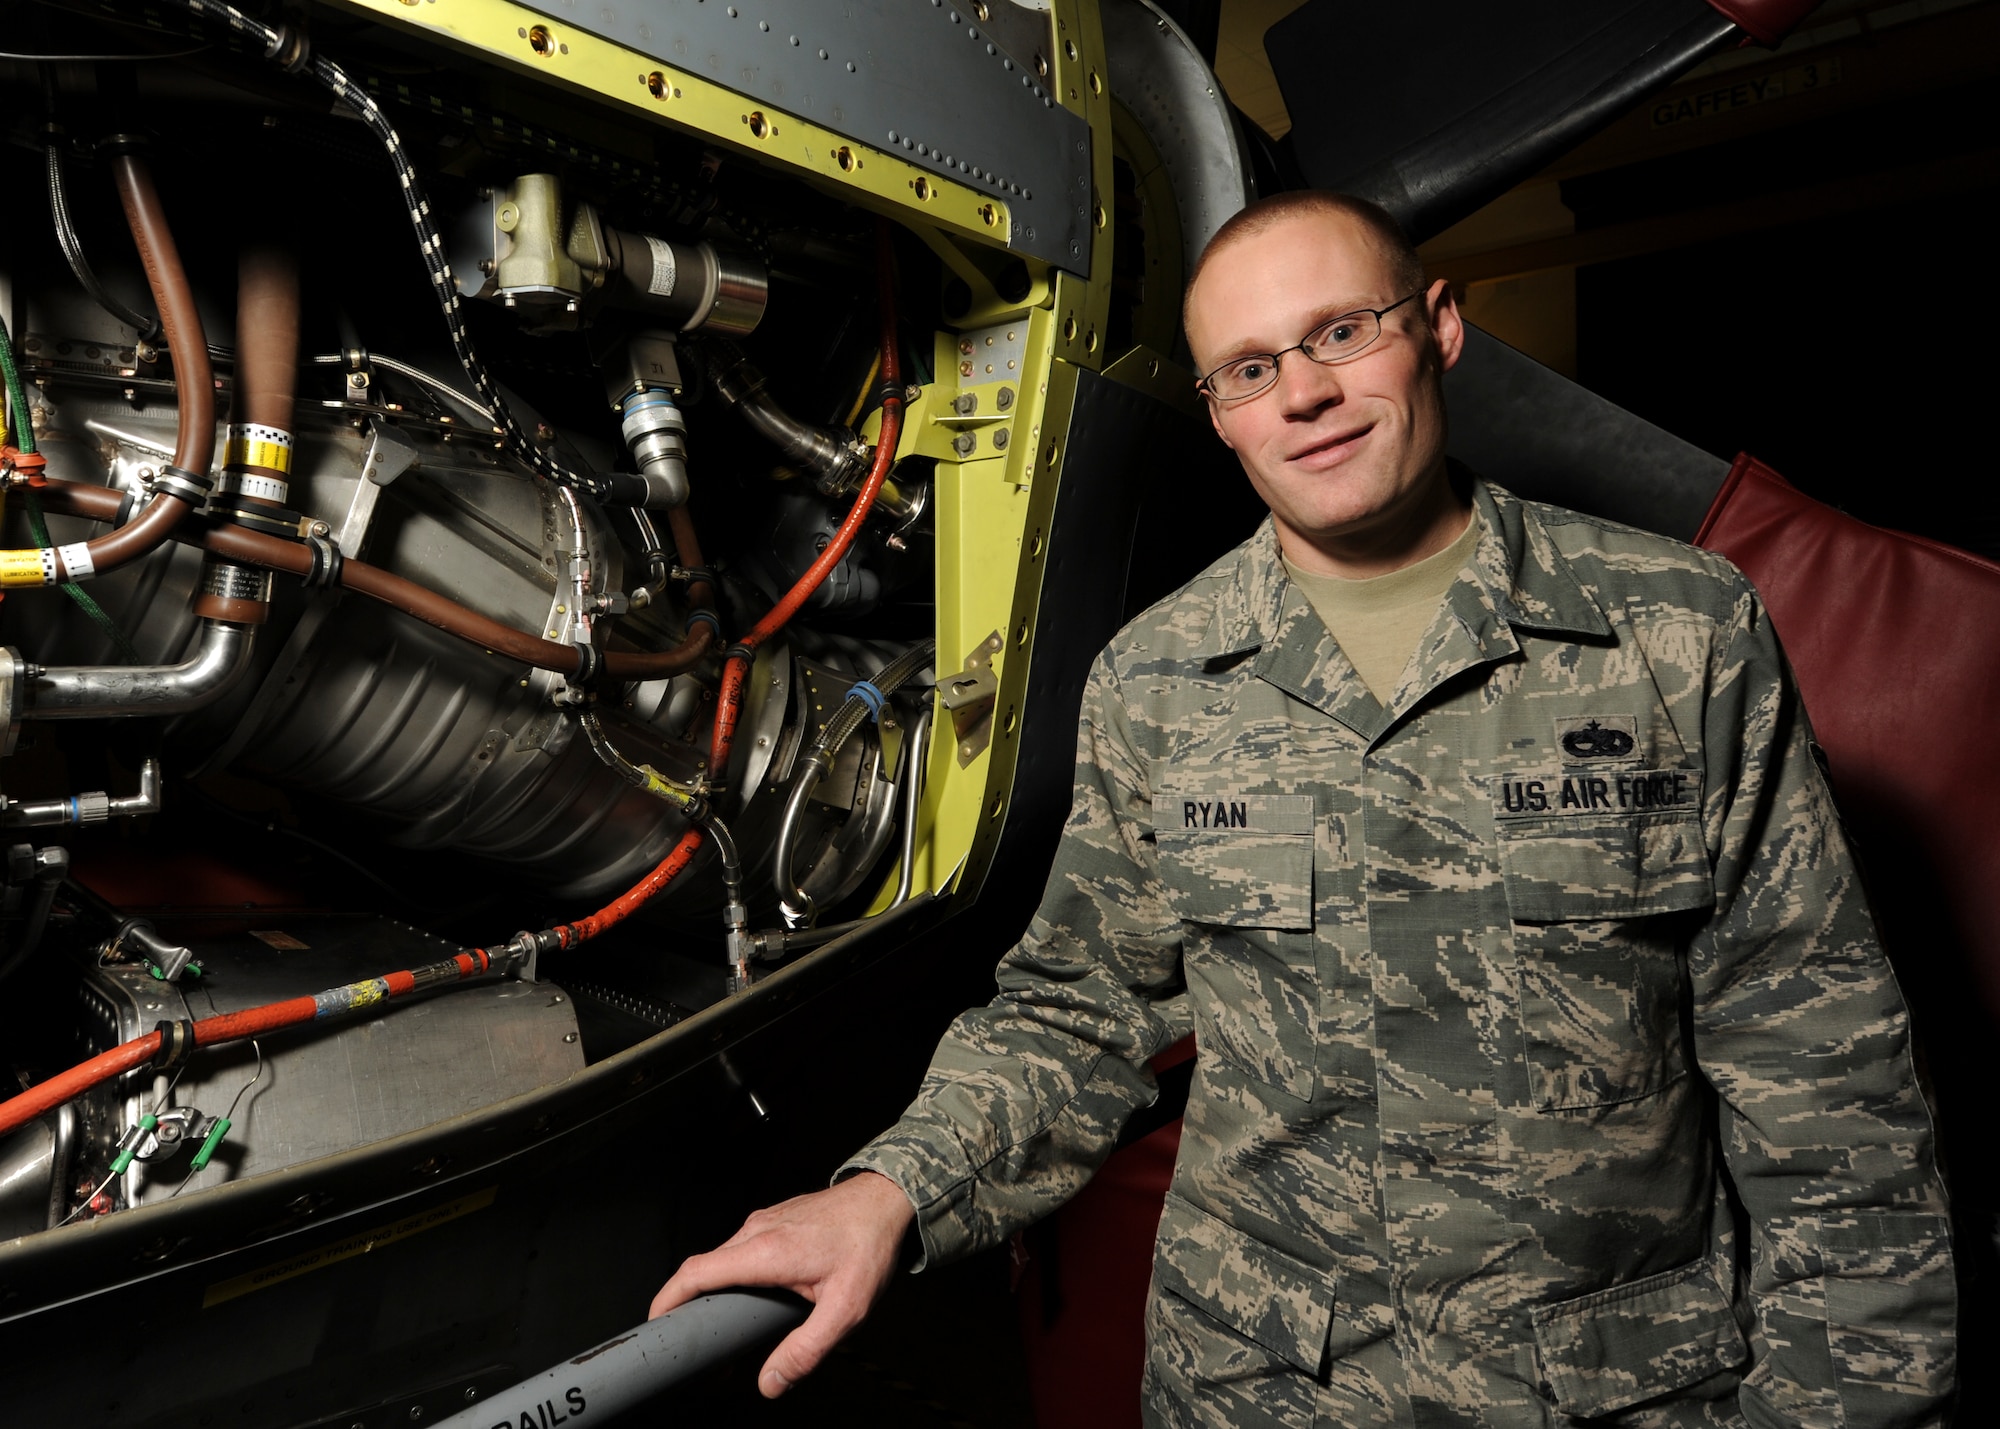 U.S. Air Force Staff Sgt. Roland Ryan, a 373rd Training Squadron Aerospace Propulsion Technical Training Instructor, has taught more than 15 classes and has helped graduate more than 80 active duty, Guard, Reserve, and international military students. Ryan is a native of Truxton, NY, native and is the president of the Airmen Against Drunk Driving program on base. (U.S. Air Force photo by Airman 1st Class Mercedes Muro) 

